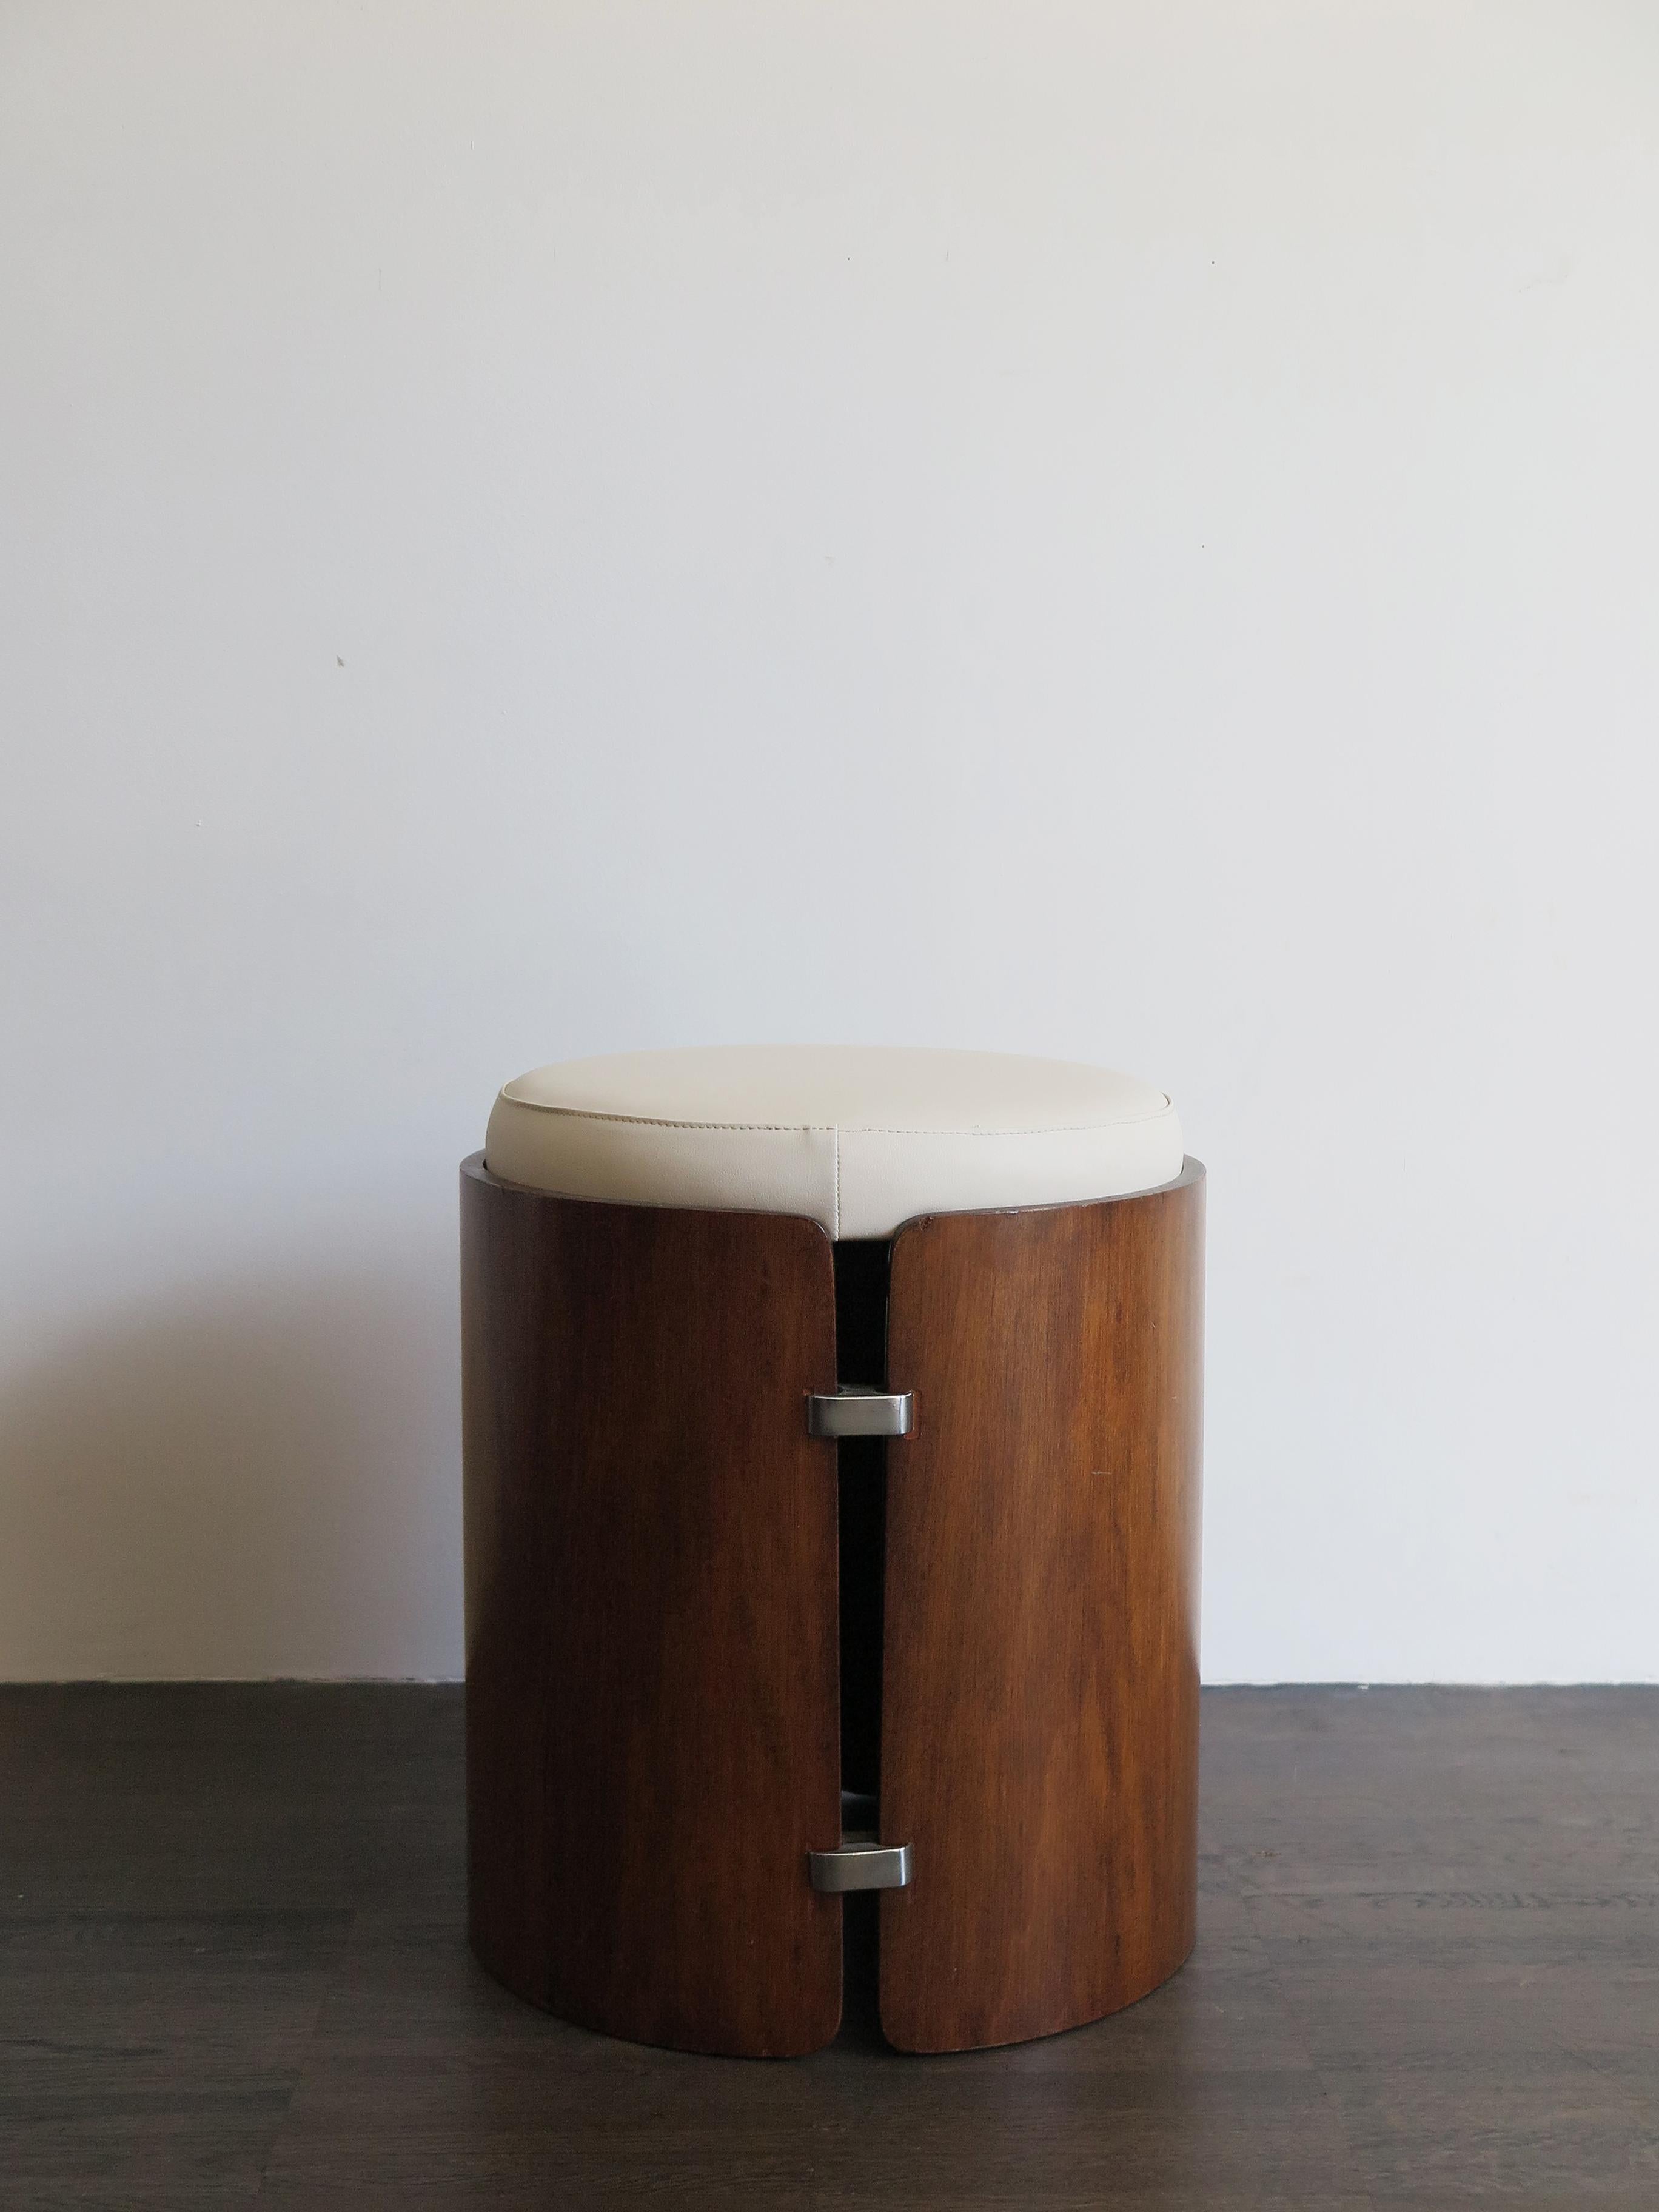 Cylindrical Mid-Century Modern design stool with wooden and metal frame and removable upholstered faux leather cushion,
Italian manufacture end of 1960s

Please note that the item is original of the period and this shows normal signs of age and